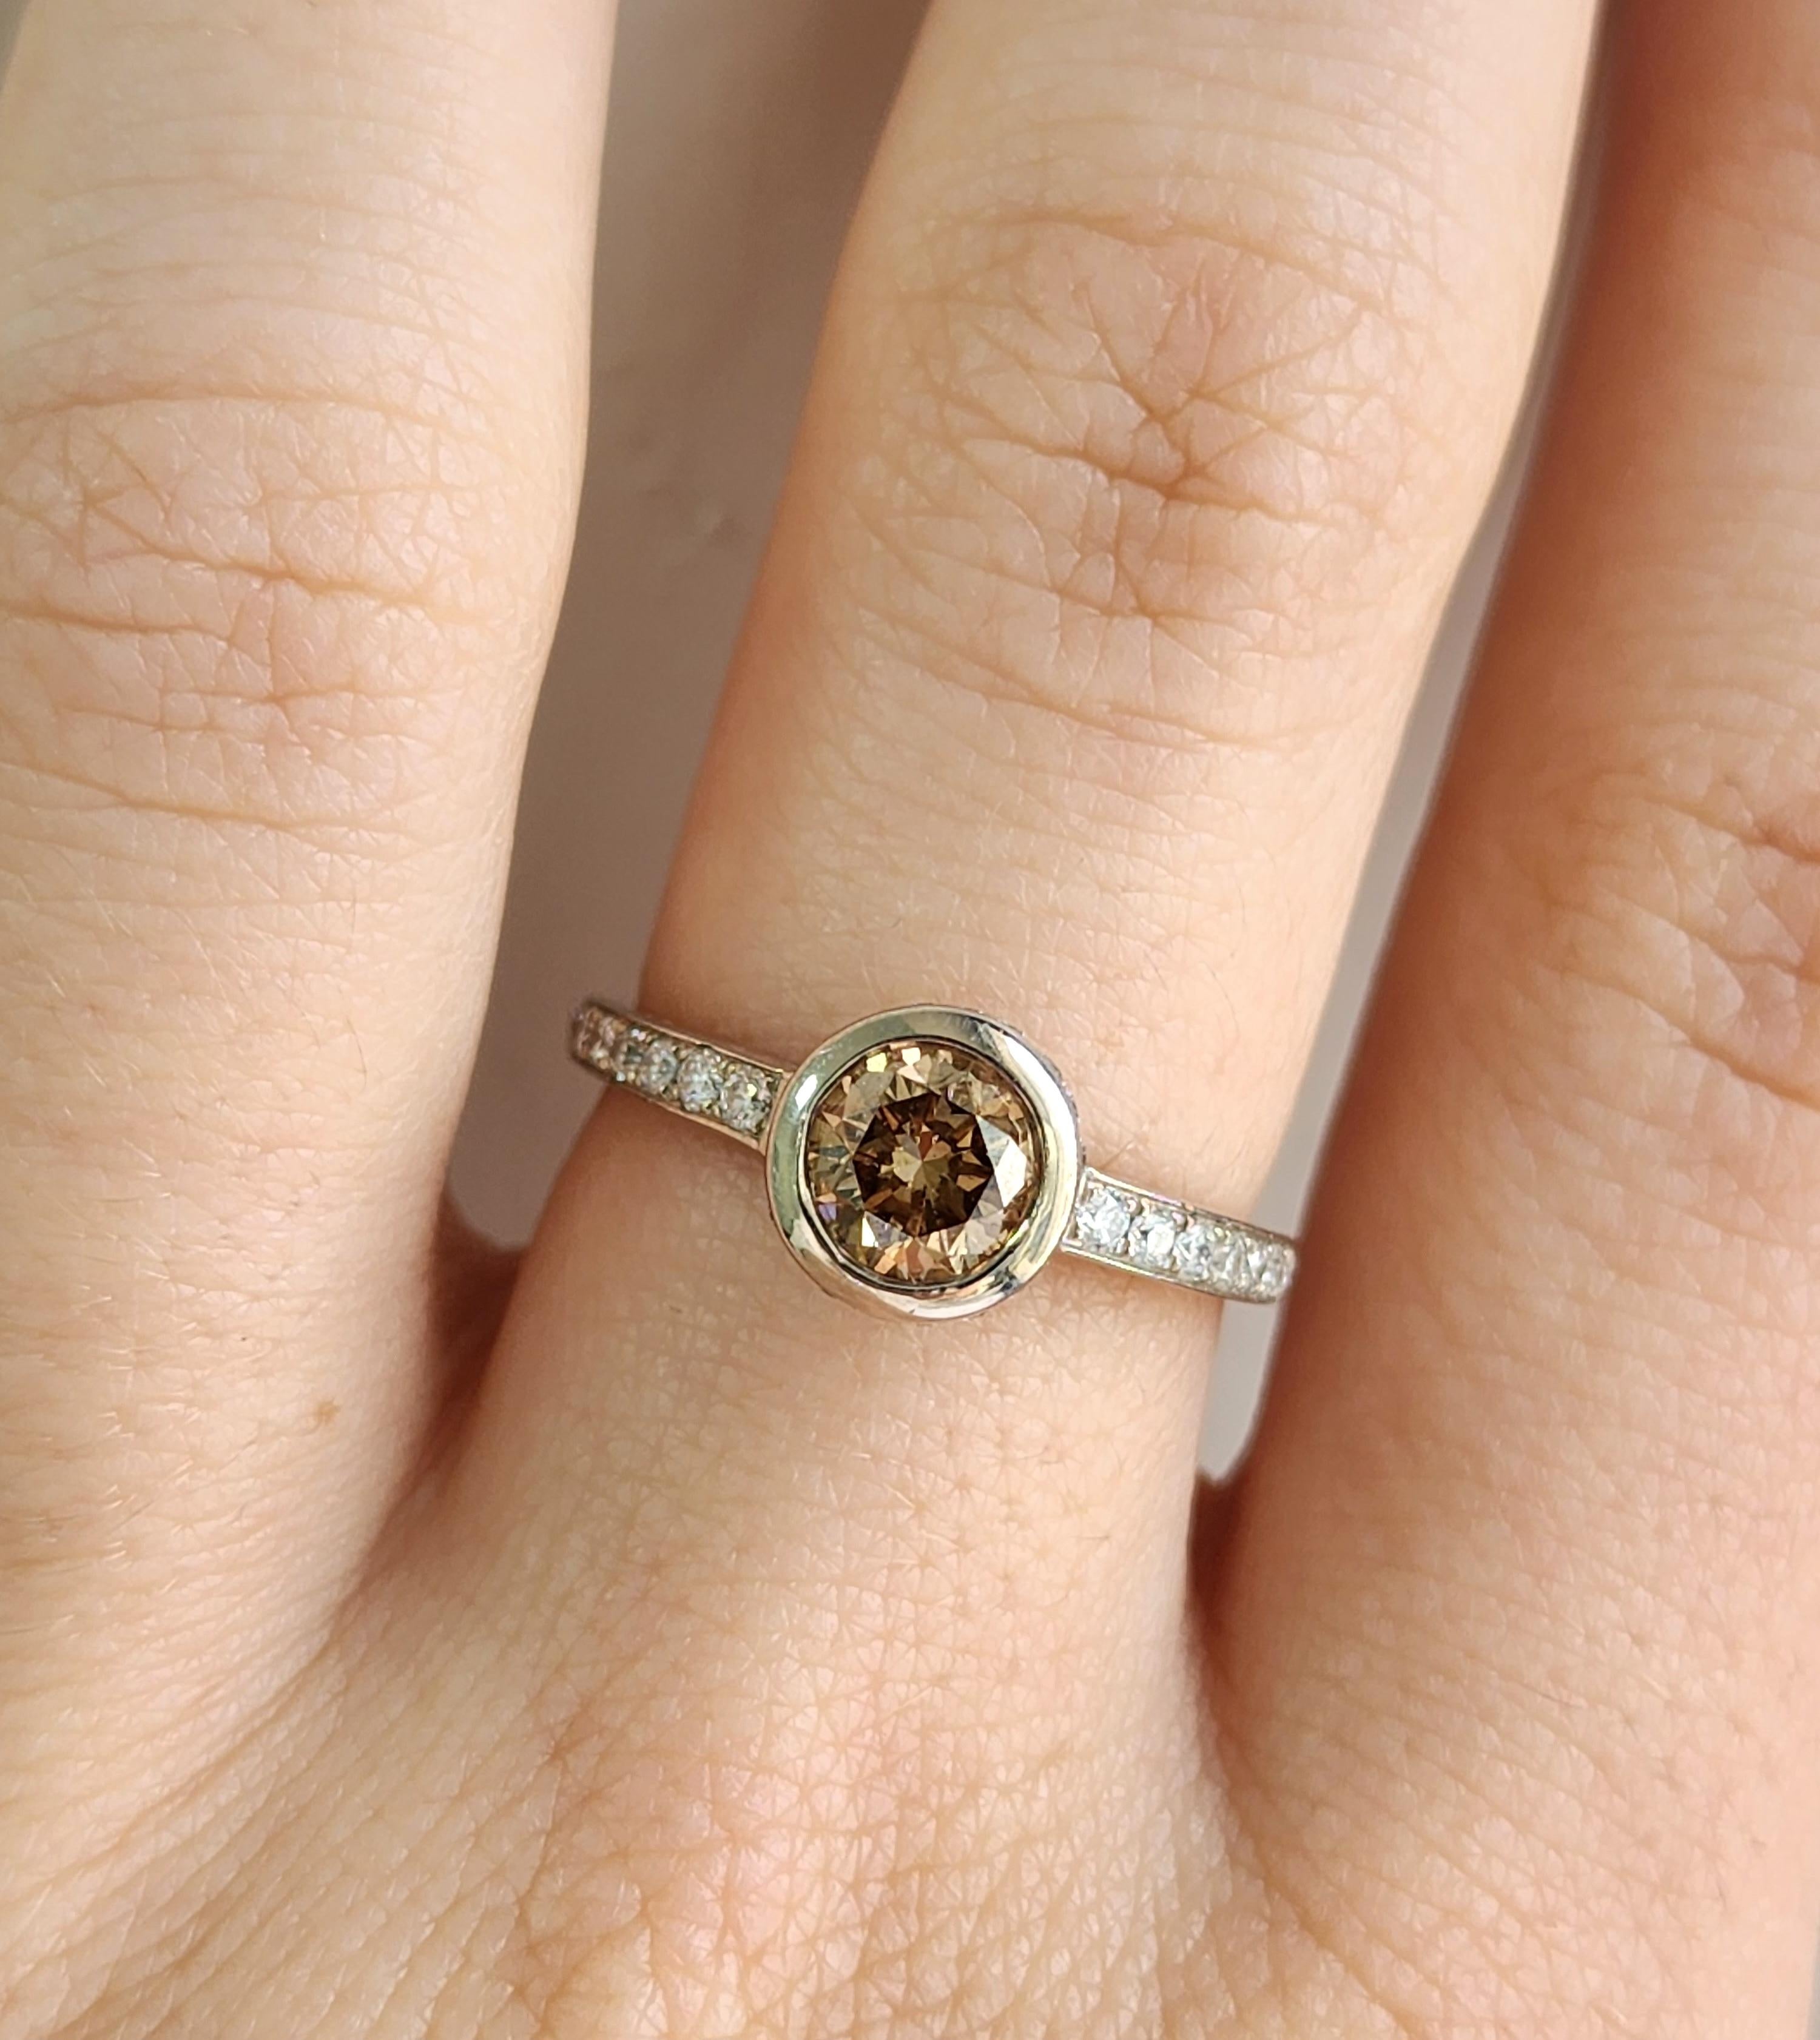 Champagne Color Diamond with Diamond Halo Ring in 18K White Gold
Elegant Diamond Ring, who's centerstone is a light brown/champagne colored diamond (Total Weight 0.84 Carat) set into an 18 K White Gold Halo Setting adourned with round small diamonds